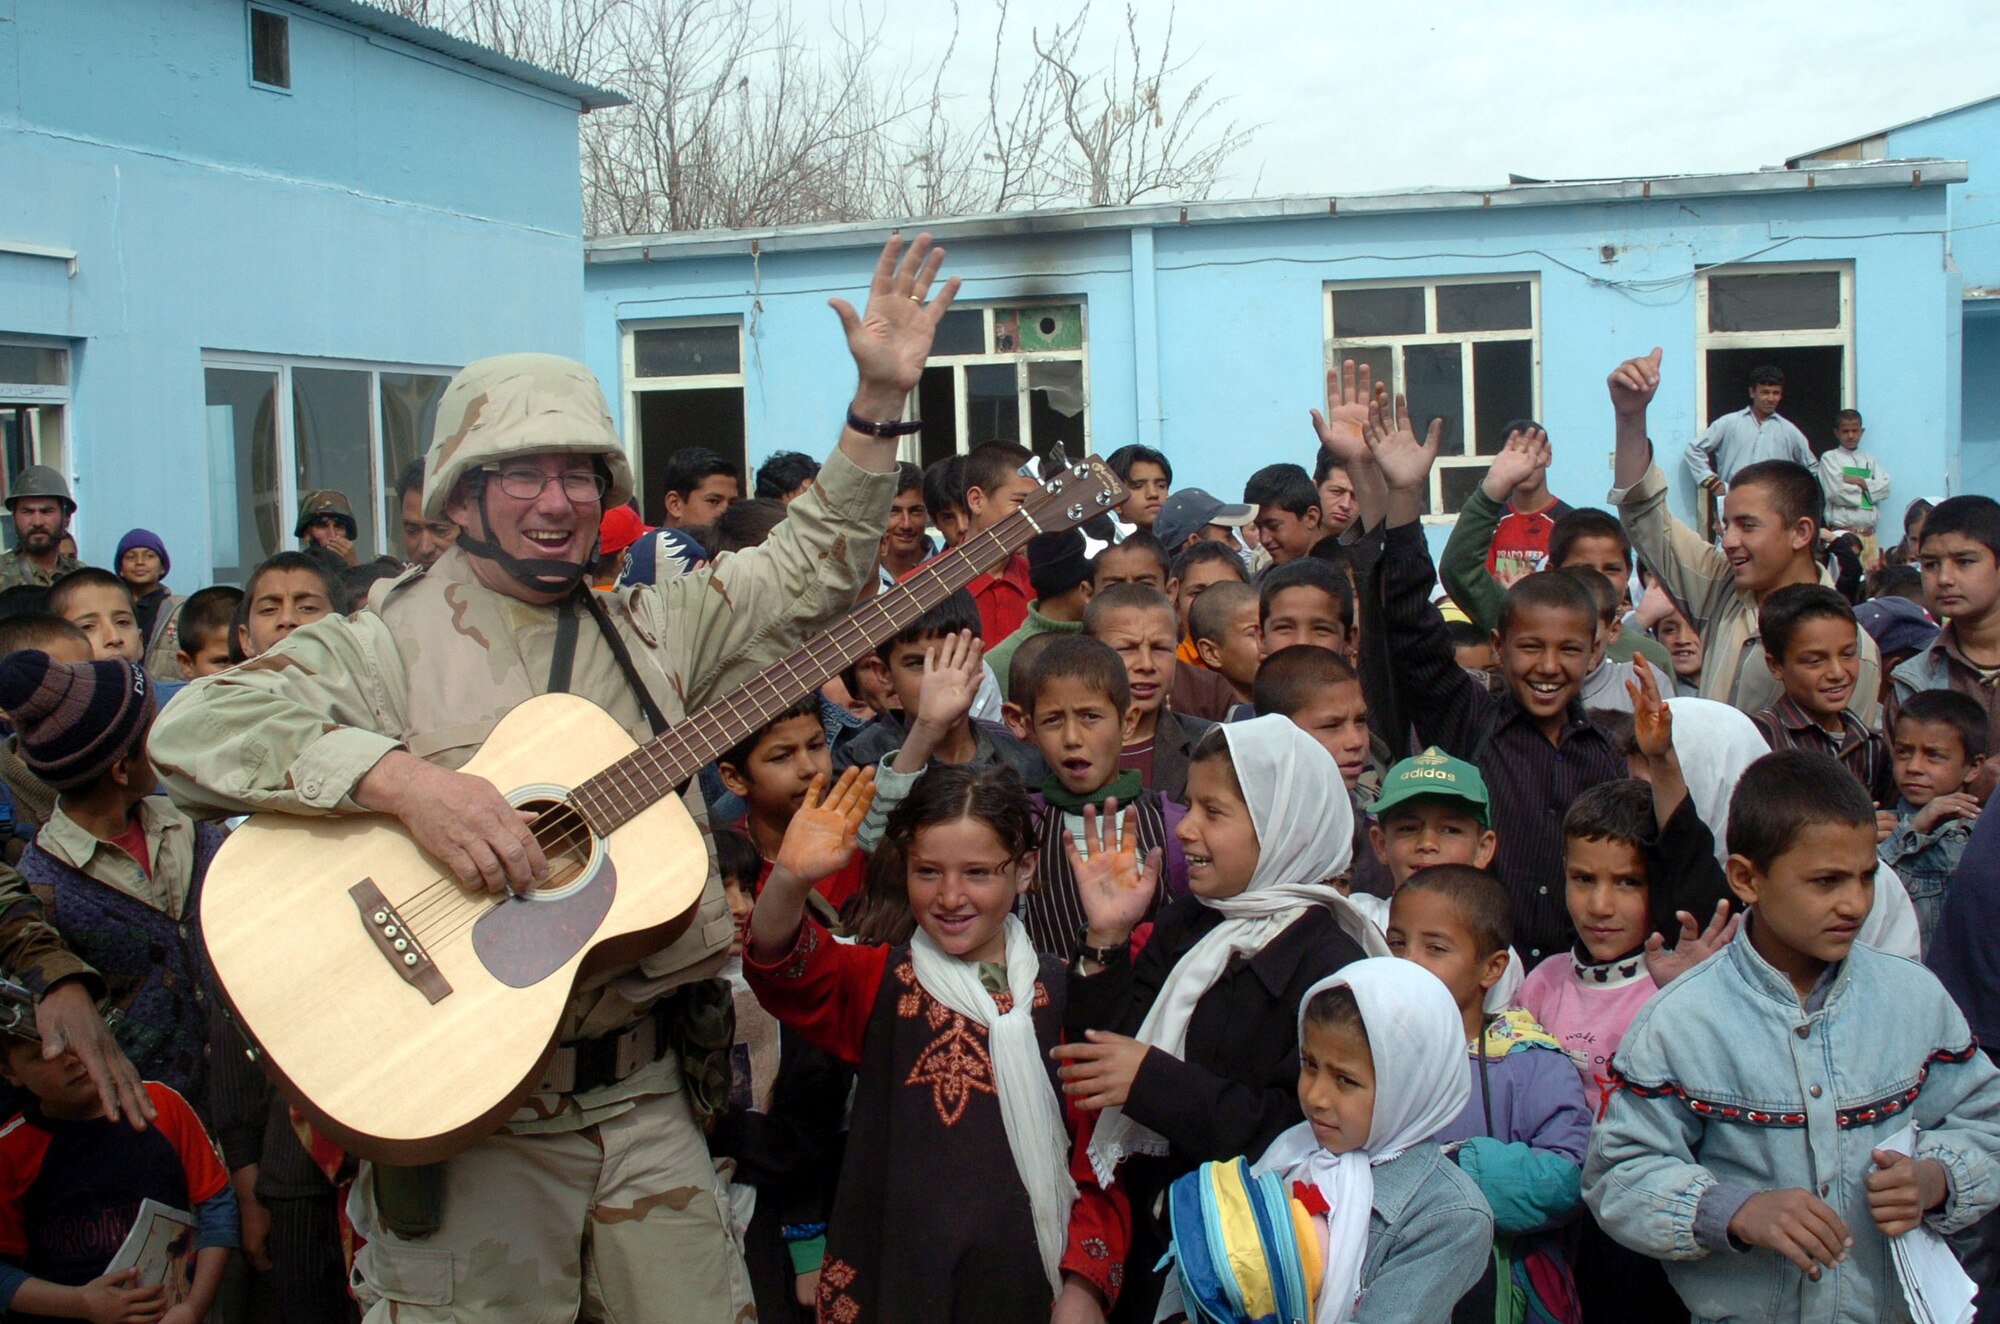 Tech. Sgt. David Foster meets with the local Afghan children June 11 after a performance with the Air Force band "Max Impact" near Camp Alamo, Afghanistan. Sergeant Foster is a guitarist with the band. (U.S. Air Force photo/Master Sgt. Regina Coonrod)